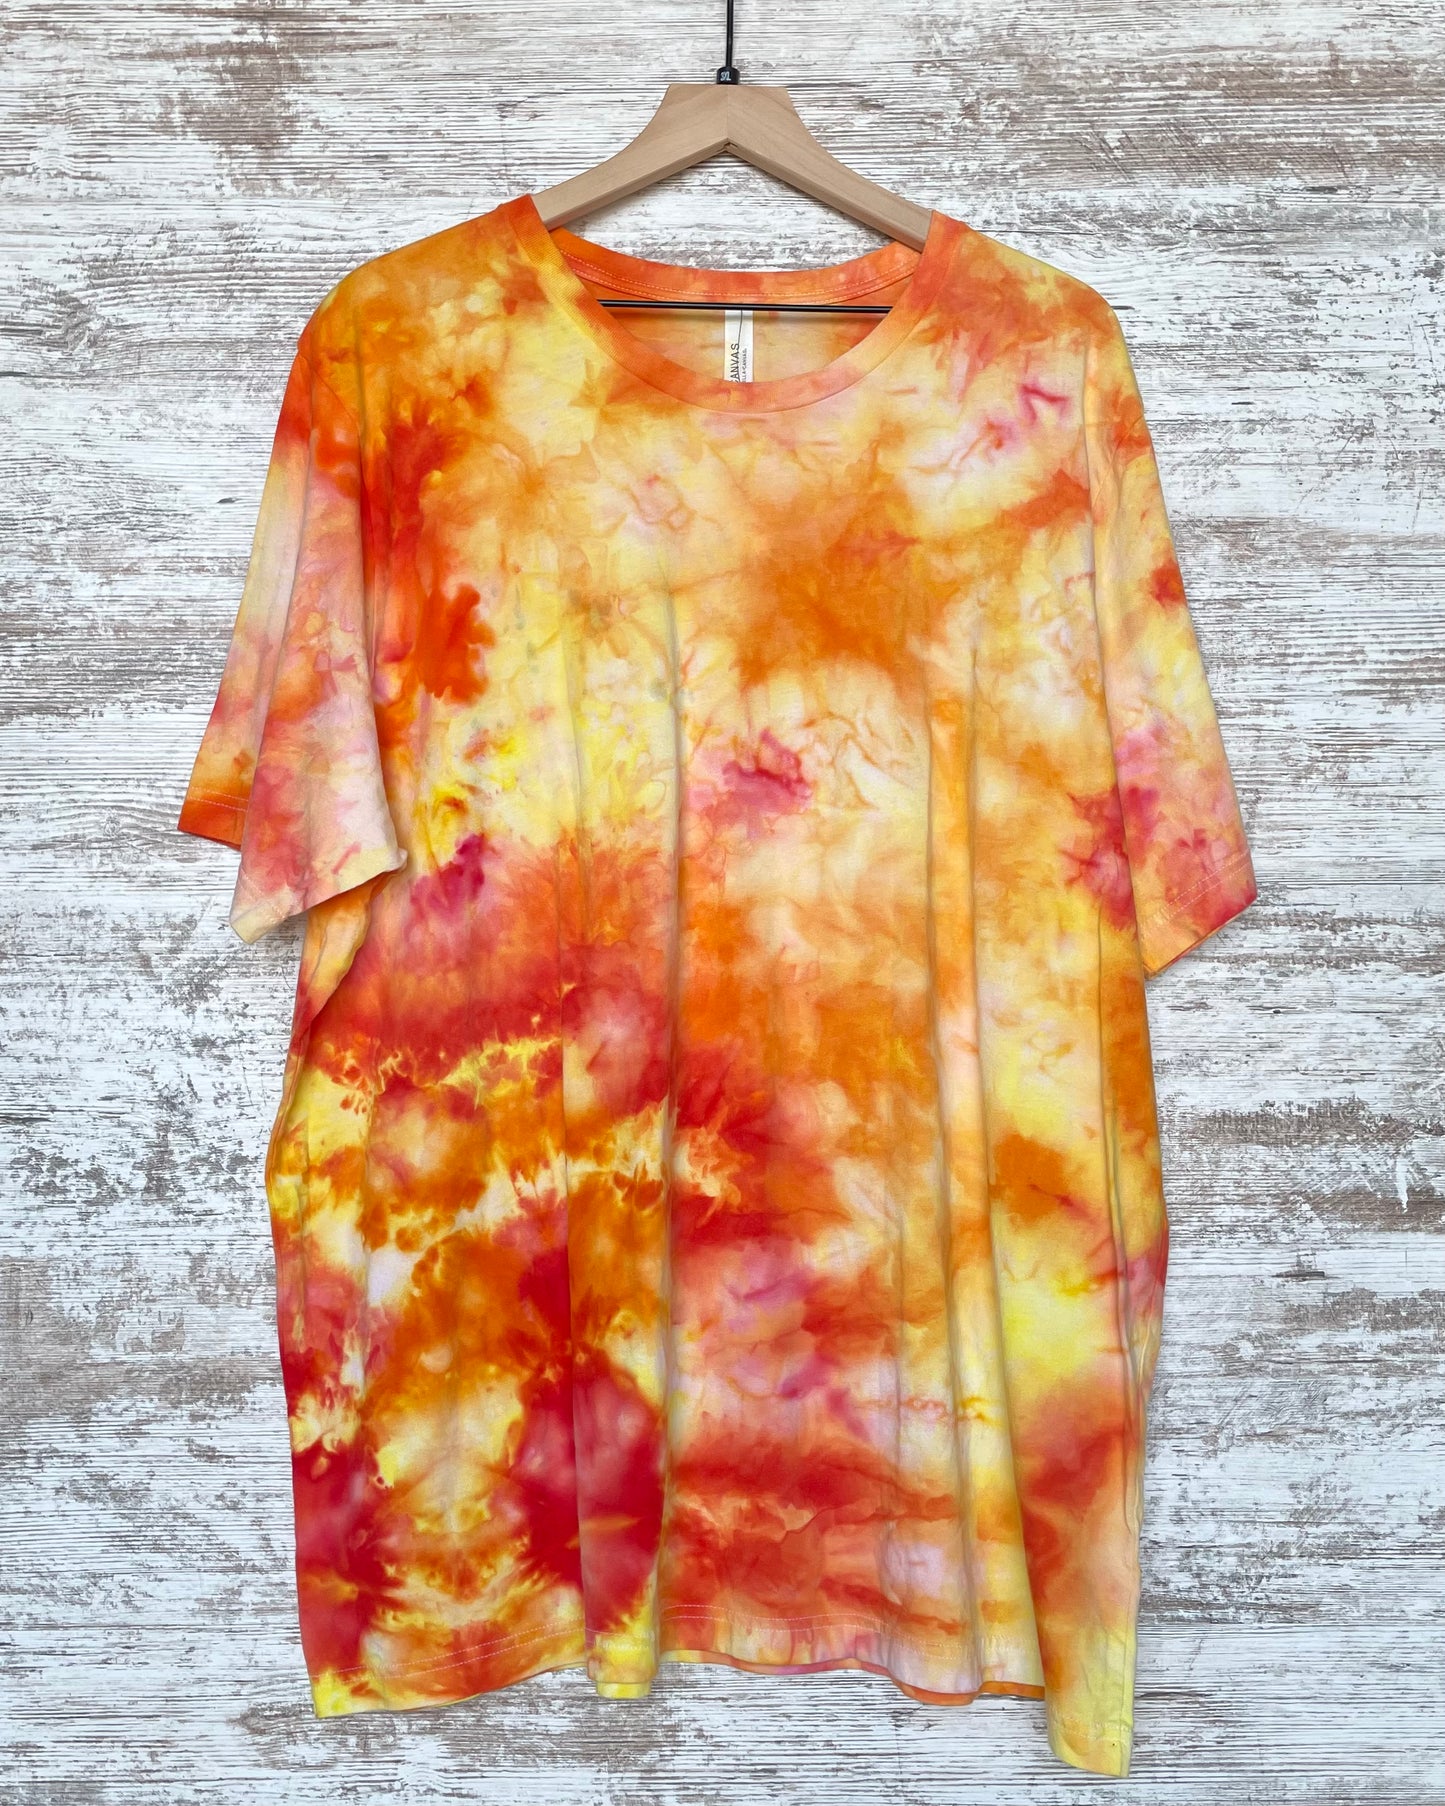 Wildfire Ice-Dyed Adult Unisex T-shirt